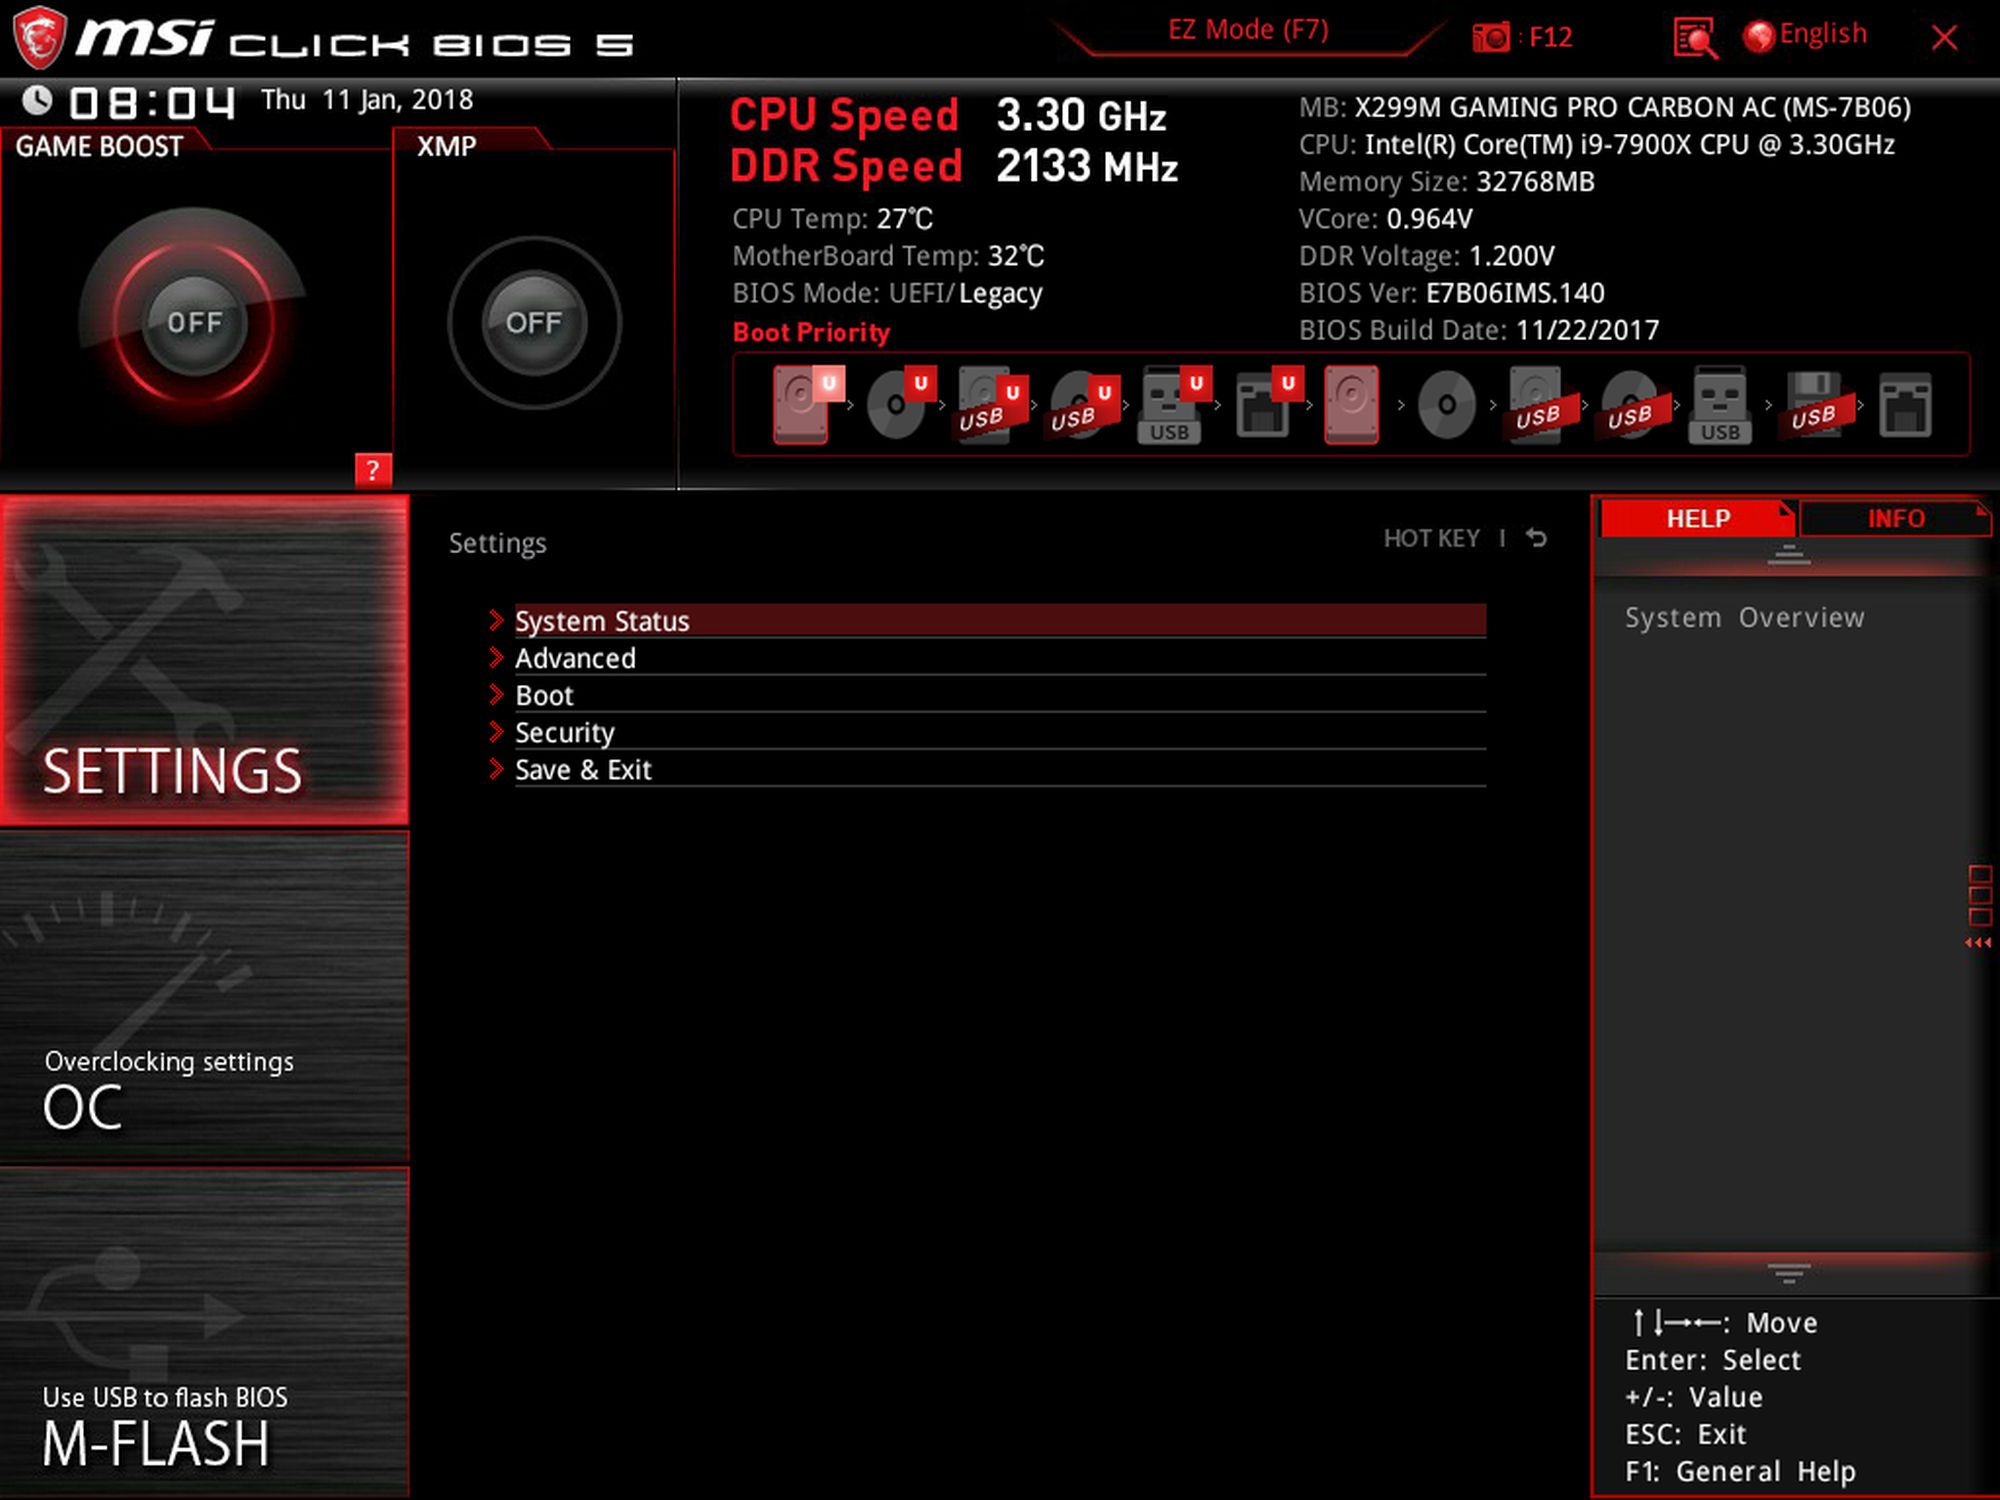 BIOS and Software - The MSI X299M Gaming Pro Carbon AC Motherboard Review